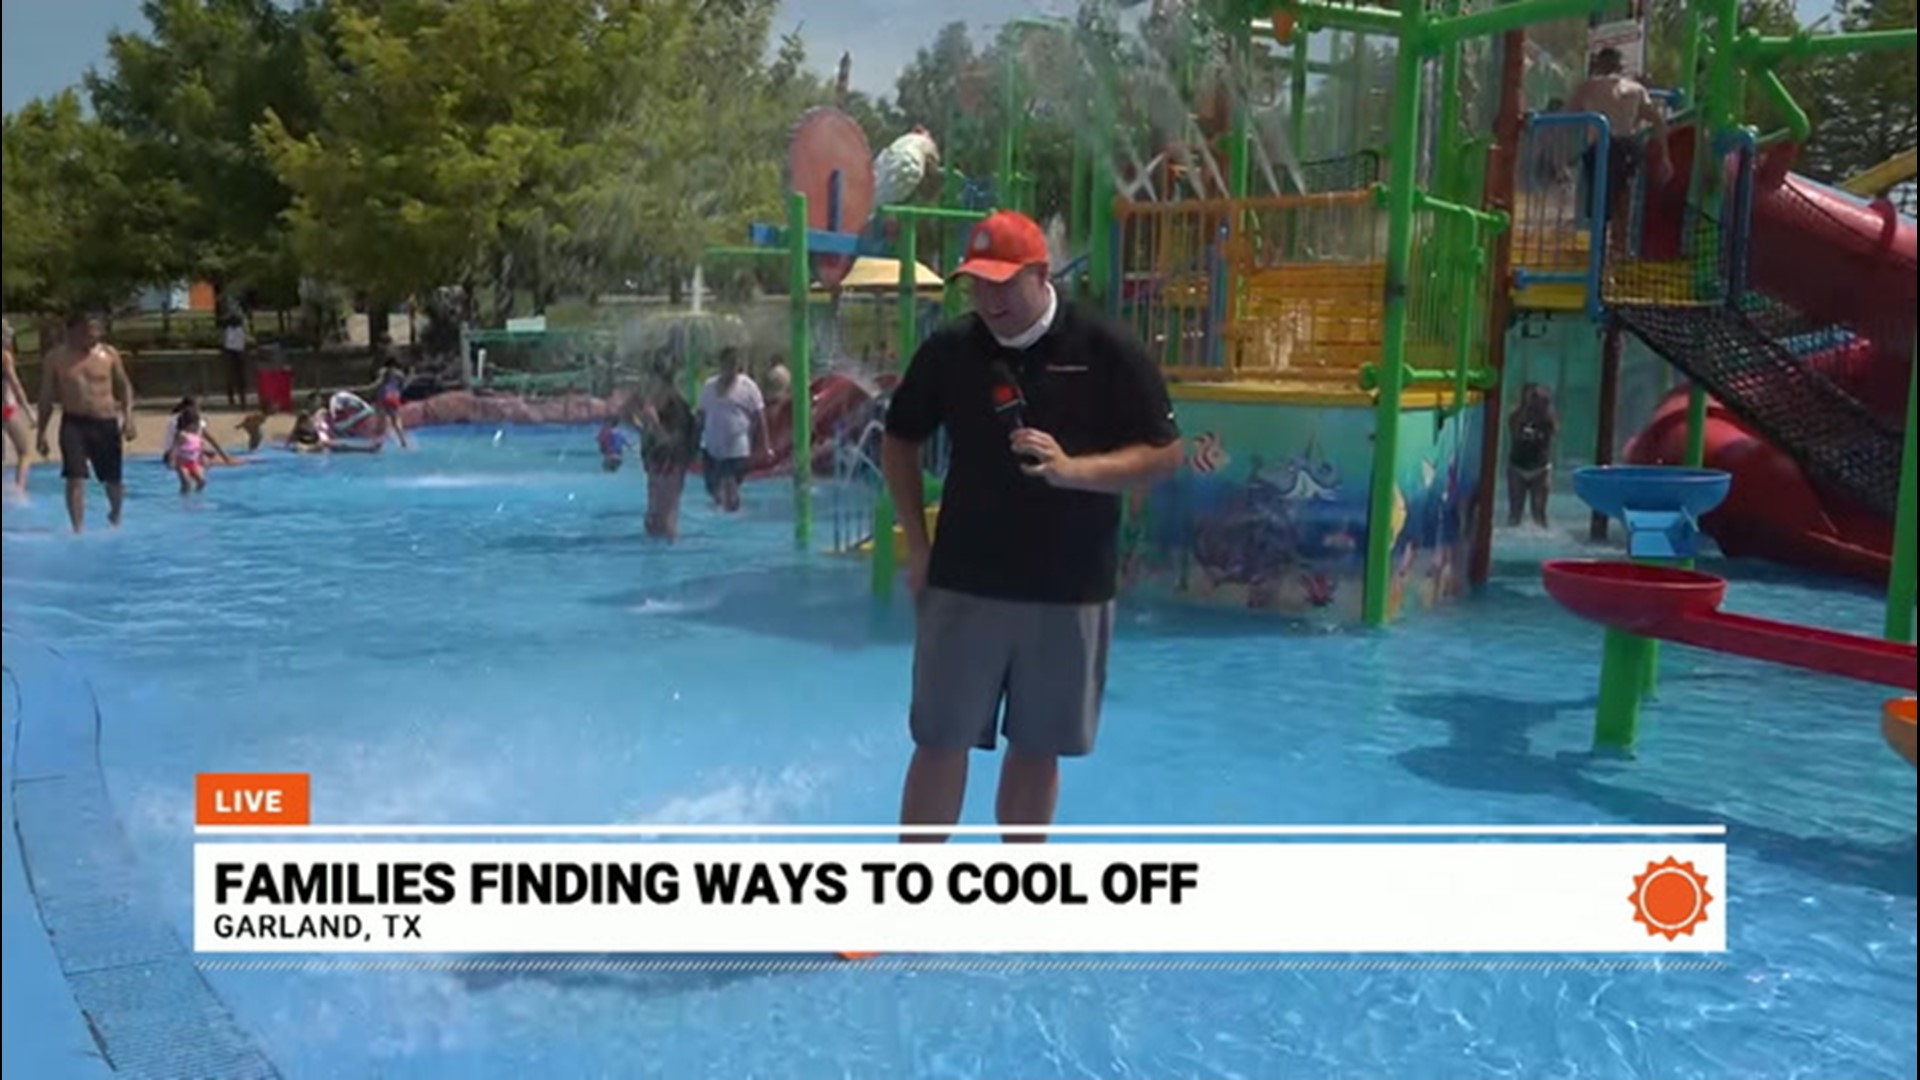 During the extreme heat in Garland, Texas, on July 13, AccuWeather's Bill Wadell was live, trying to keep cool himself.